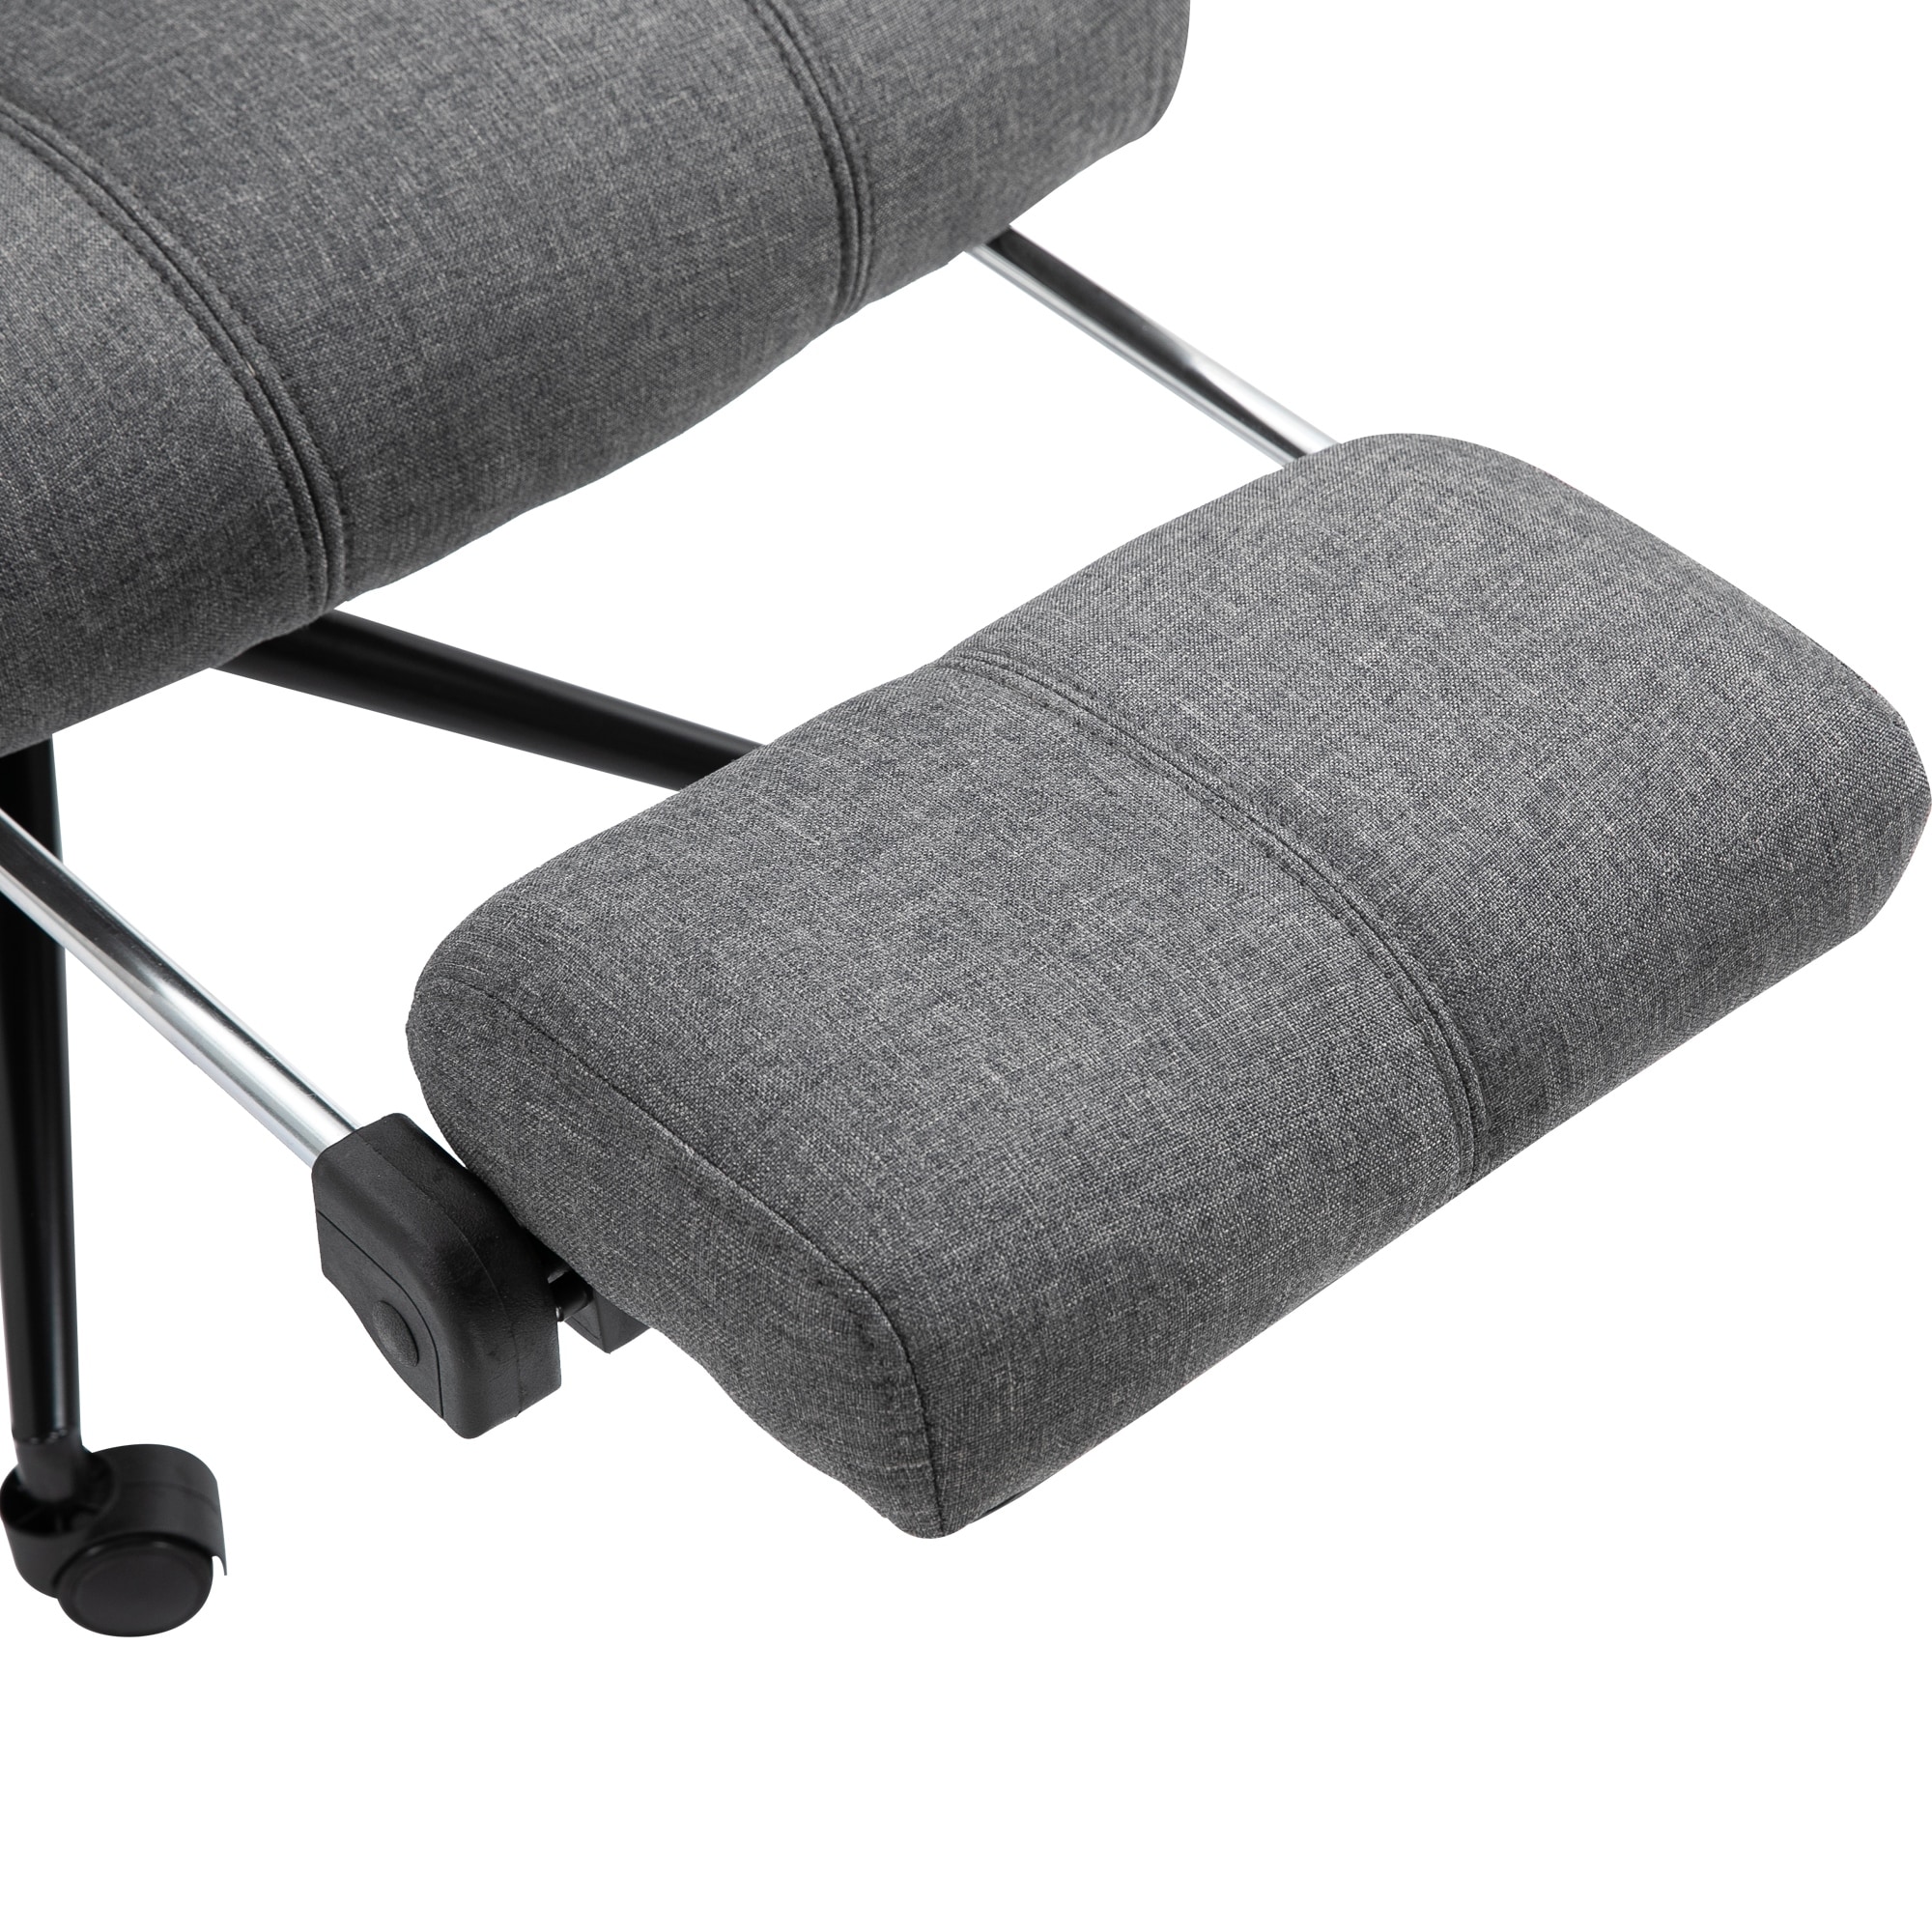 https://ak1.ostkcdn.com/images/products/is/images/direct/53d8d4c1554bac8e3fad6fc22beb56c728a95975/Vinsetto-Executive-Linen-Fabric-Home-Office-Chair-with-Retractable-Footrest%2C-Headrest%2C-and-Lumbar-Support.jpg